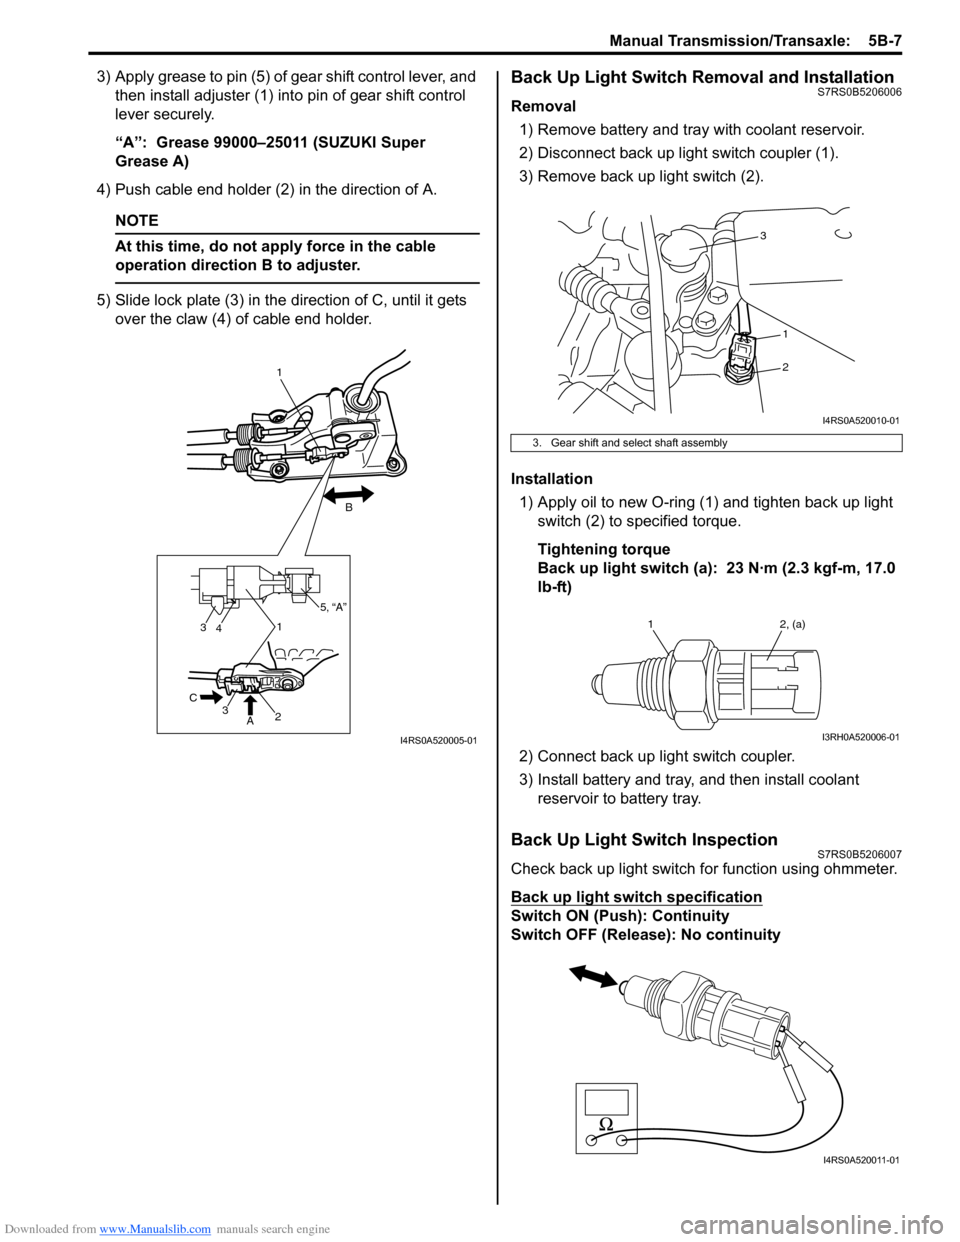 SUZUKI SWIFT 2007 2.G Service Workshop Manual Downloaded from www.Manualslib.com manuals search engine Manual Transmission/Transaxle:  5B-7
3) Apply grease to pin (5) of gear shift control lever, and then install adjuster (1) into pin of gear shi